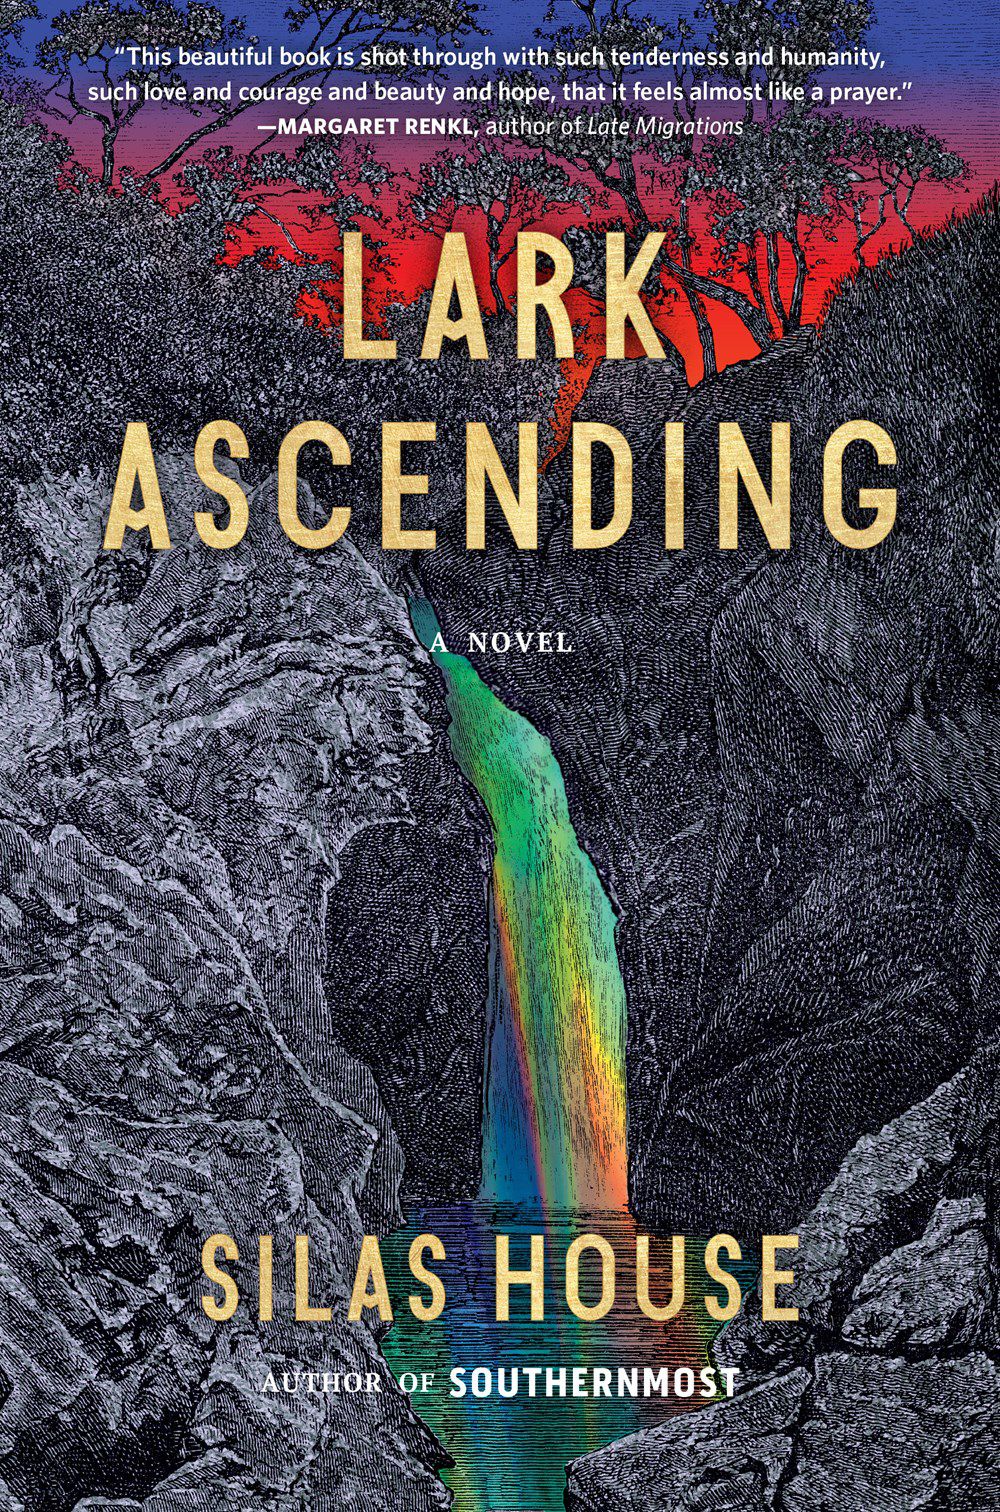 Cover image of Lark Ascending from Silas House, featuring a rainbow-colored waterfall